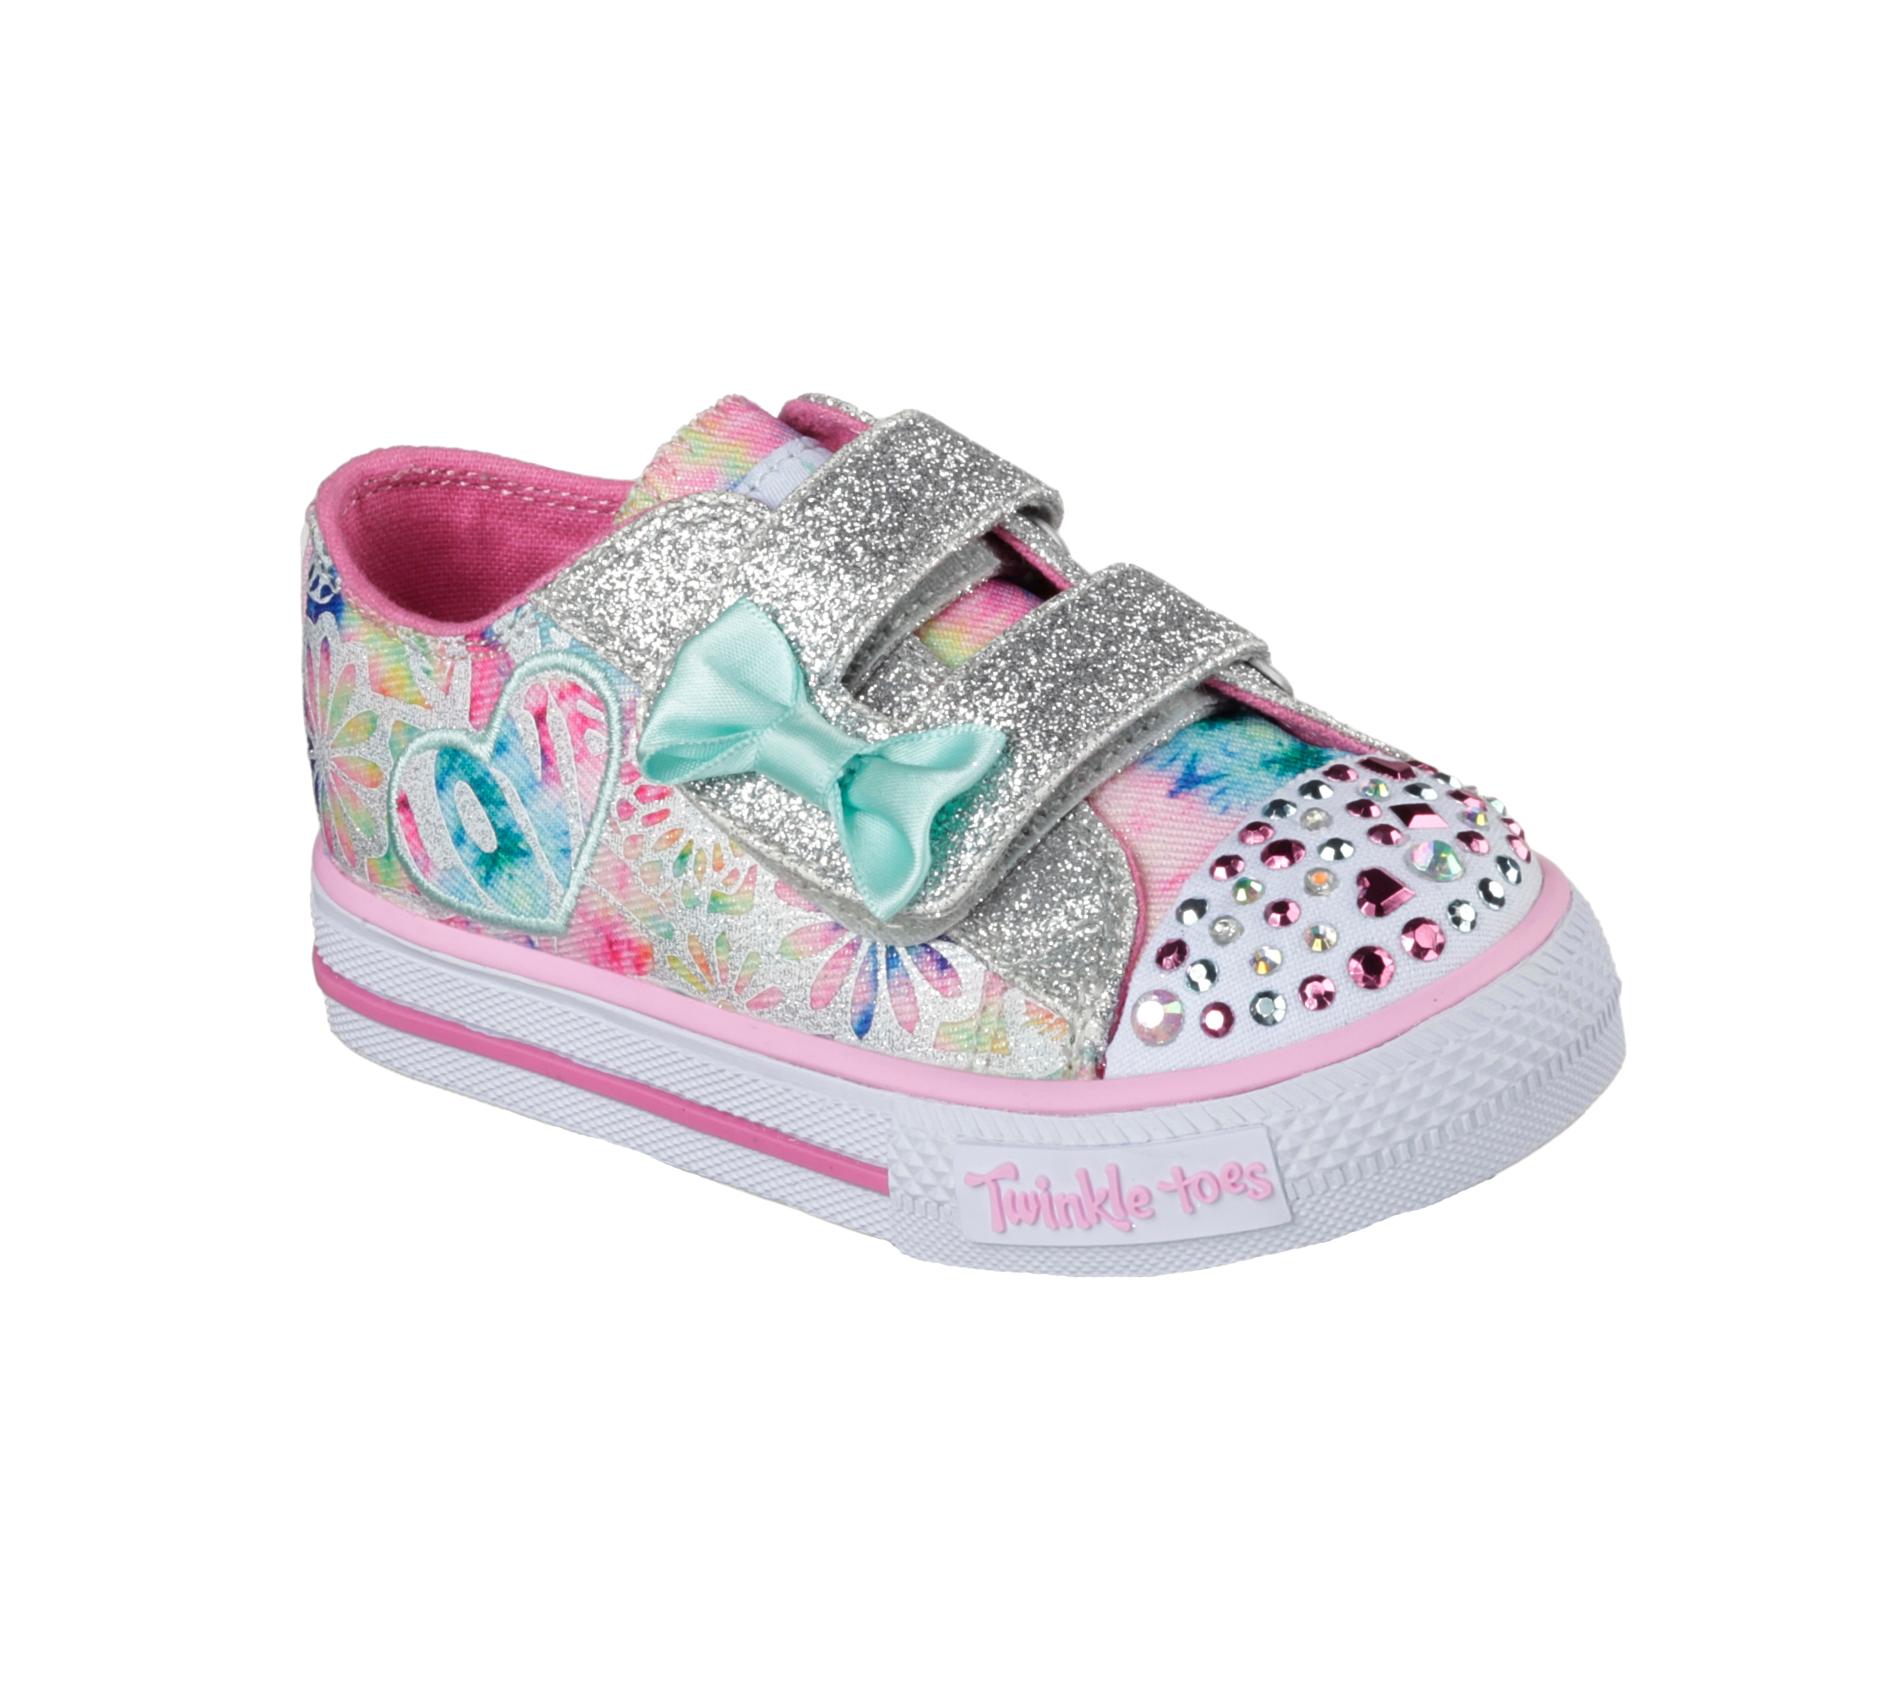 Skechers Toddler Girl's Twinkle Toes: Shuffles White/Floral Light-Up ...